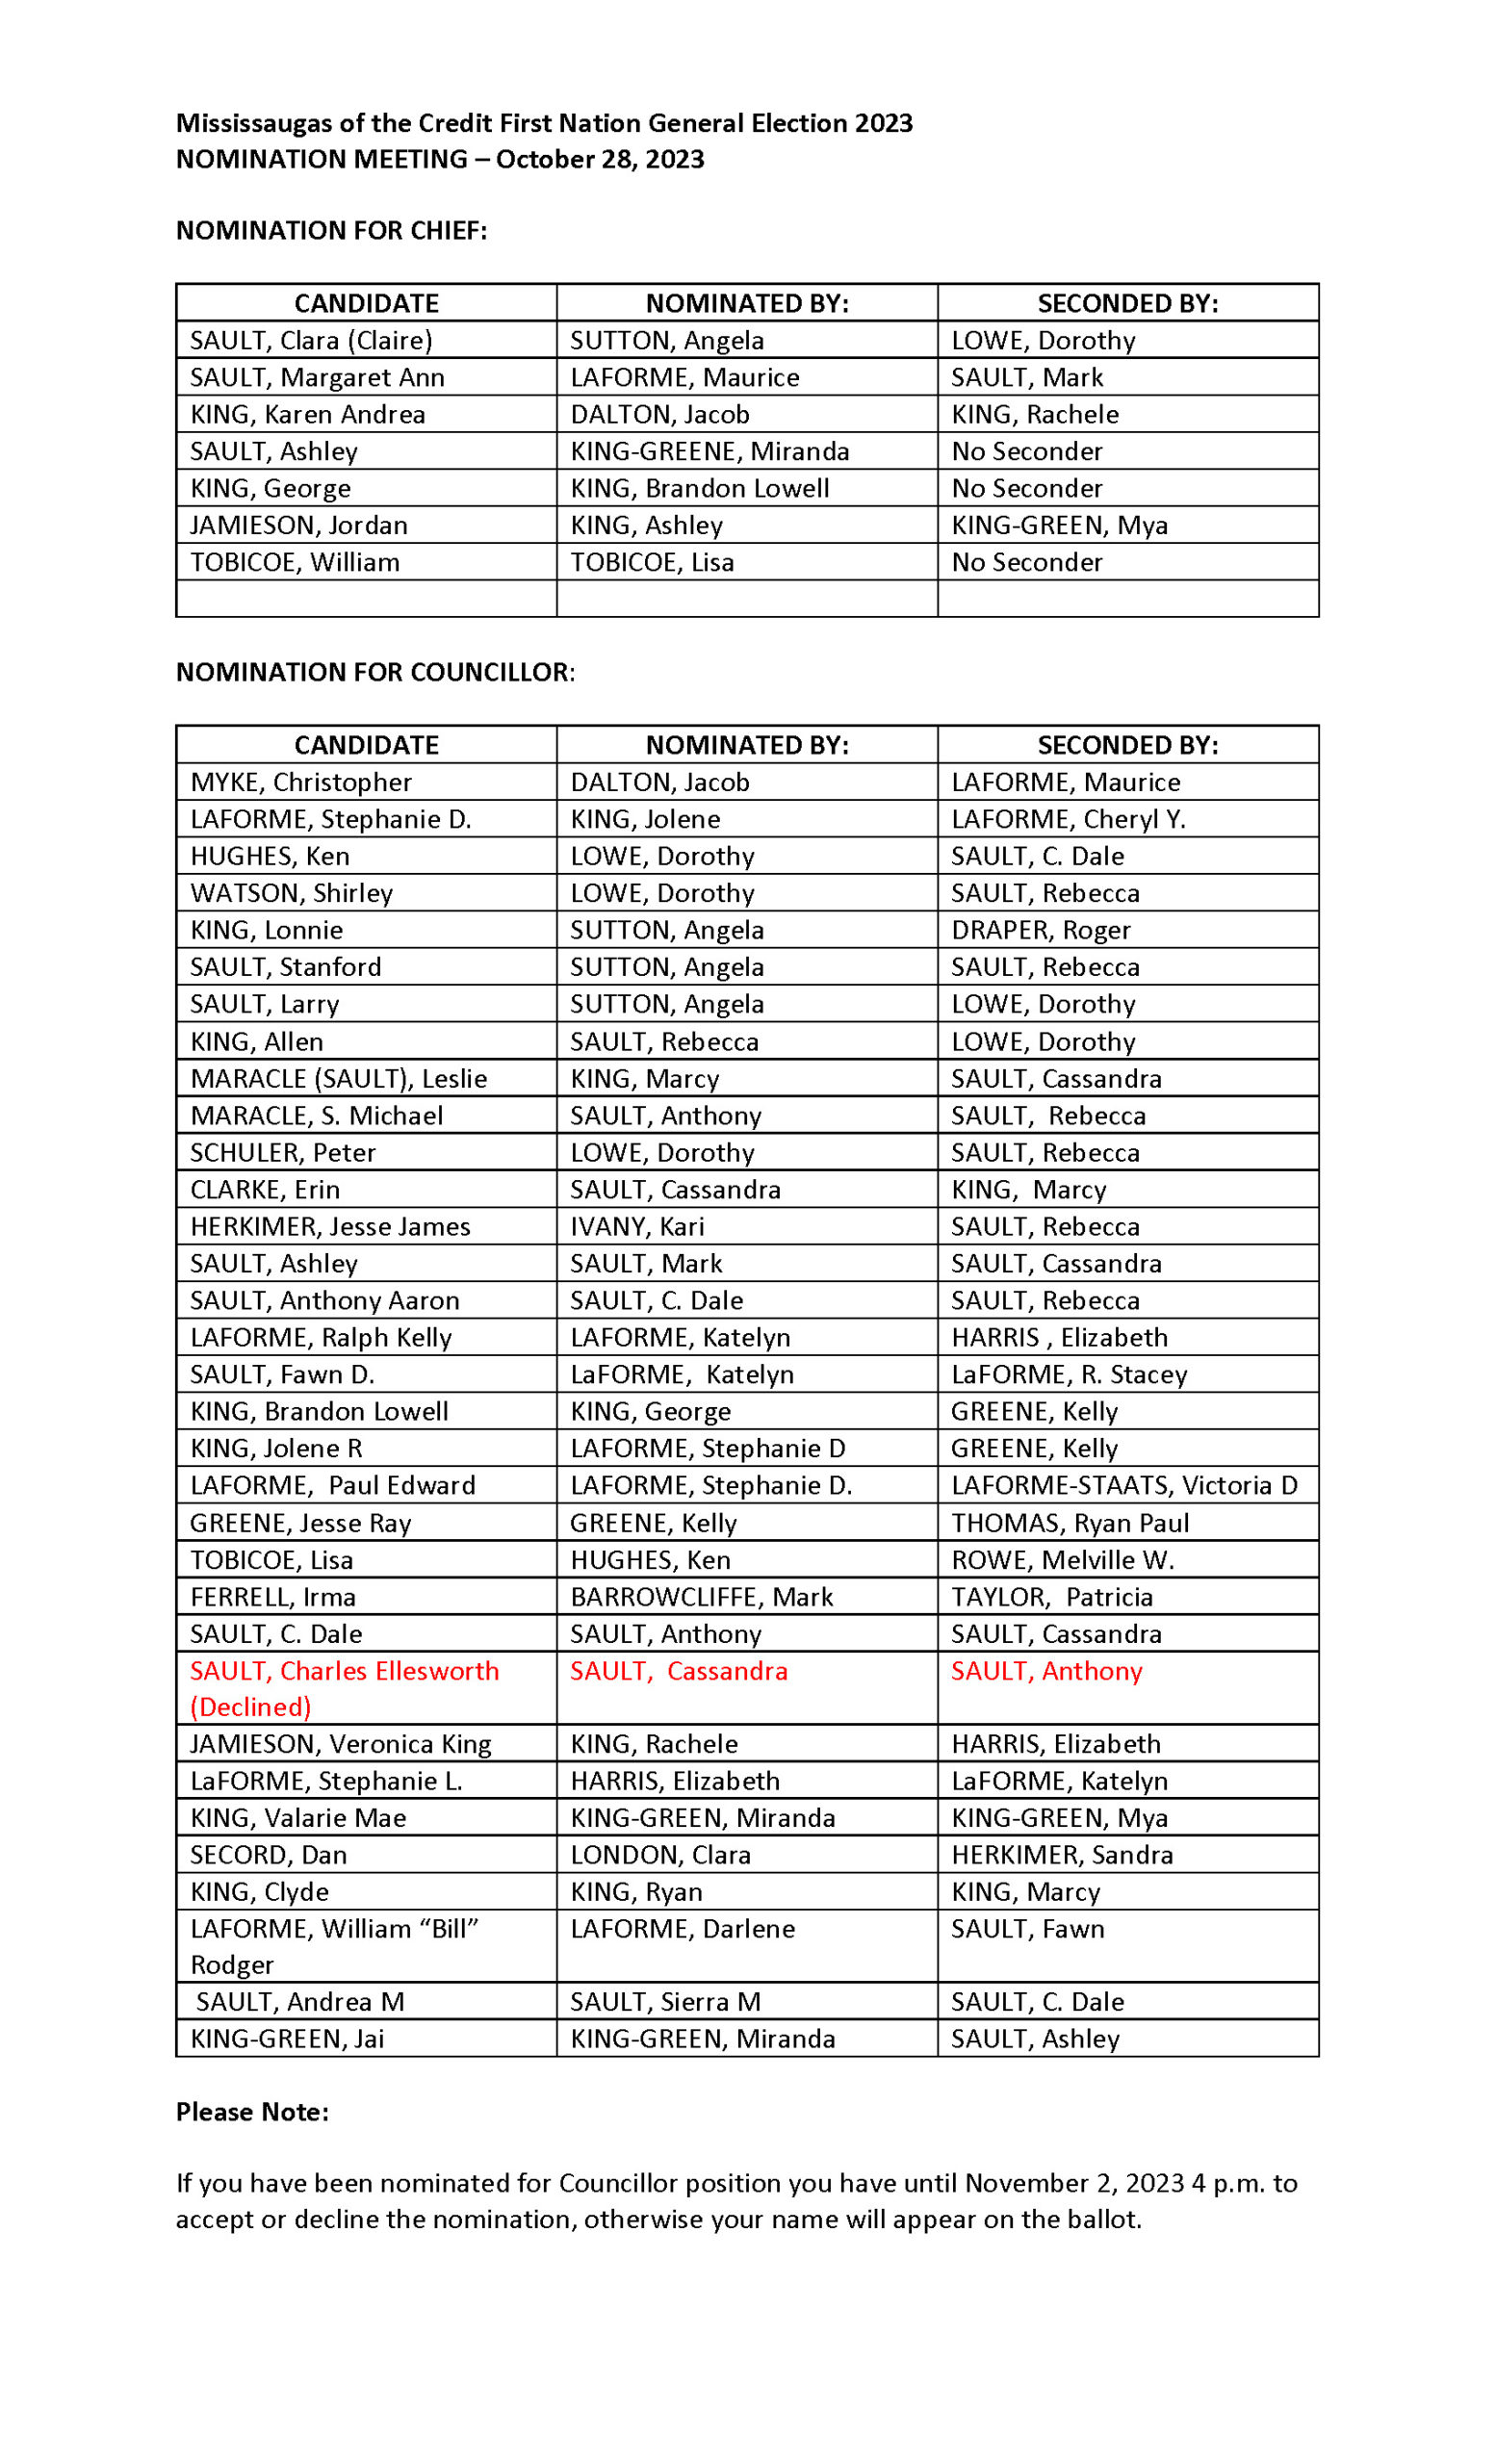 Mississaugas of the Credit First Nation General Election 2023 LIST OF NOMINATIONS